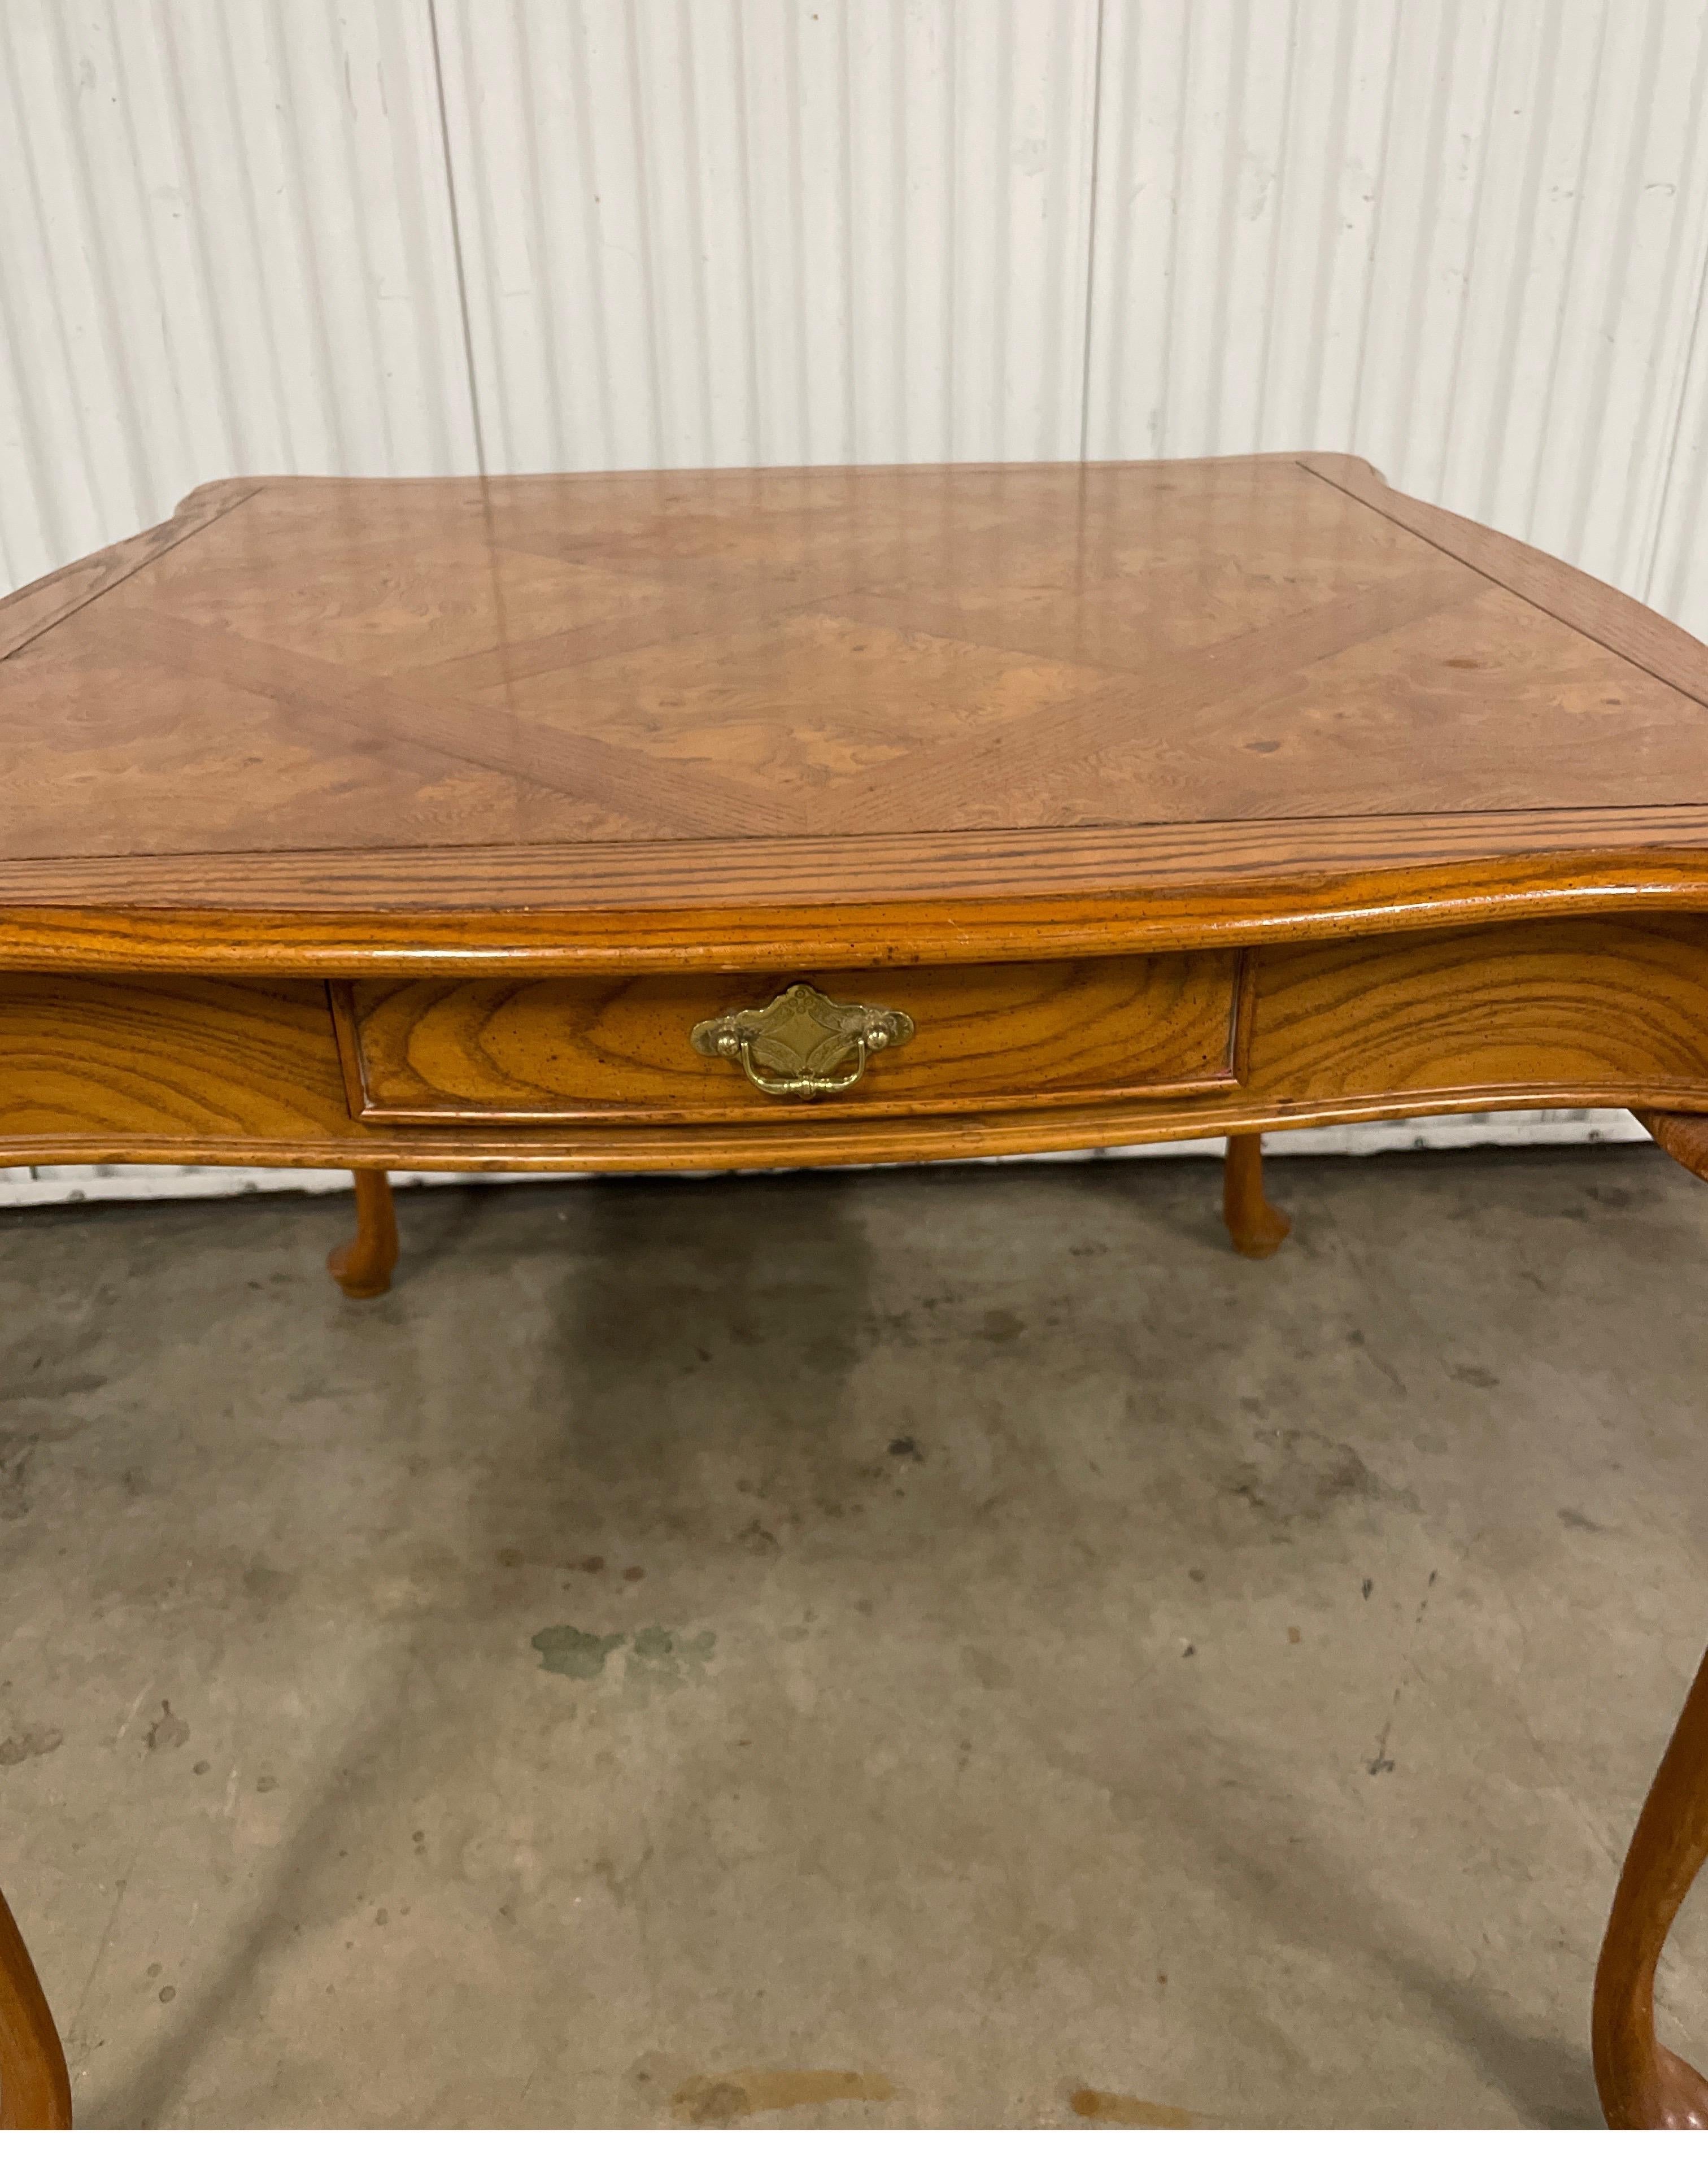 Vintage Burlwood marquetry top game table with cabriole legs by Hekman Furniture Company,